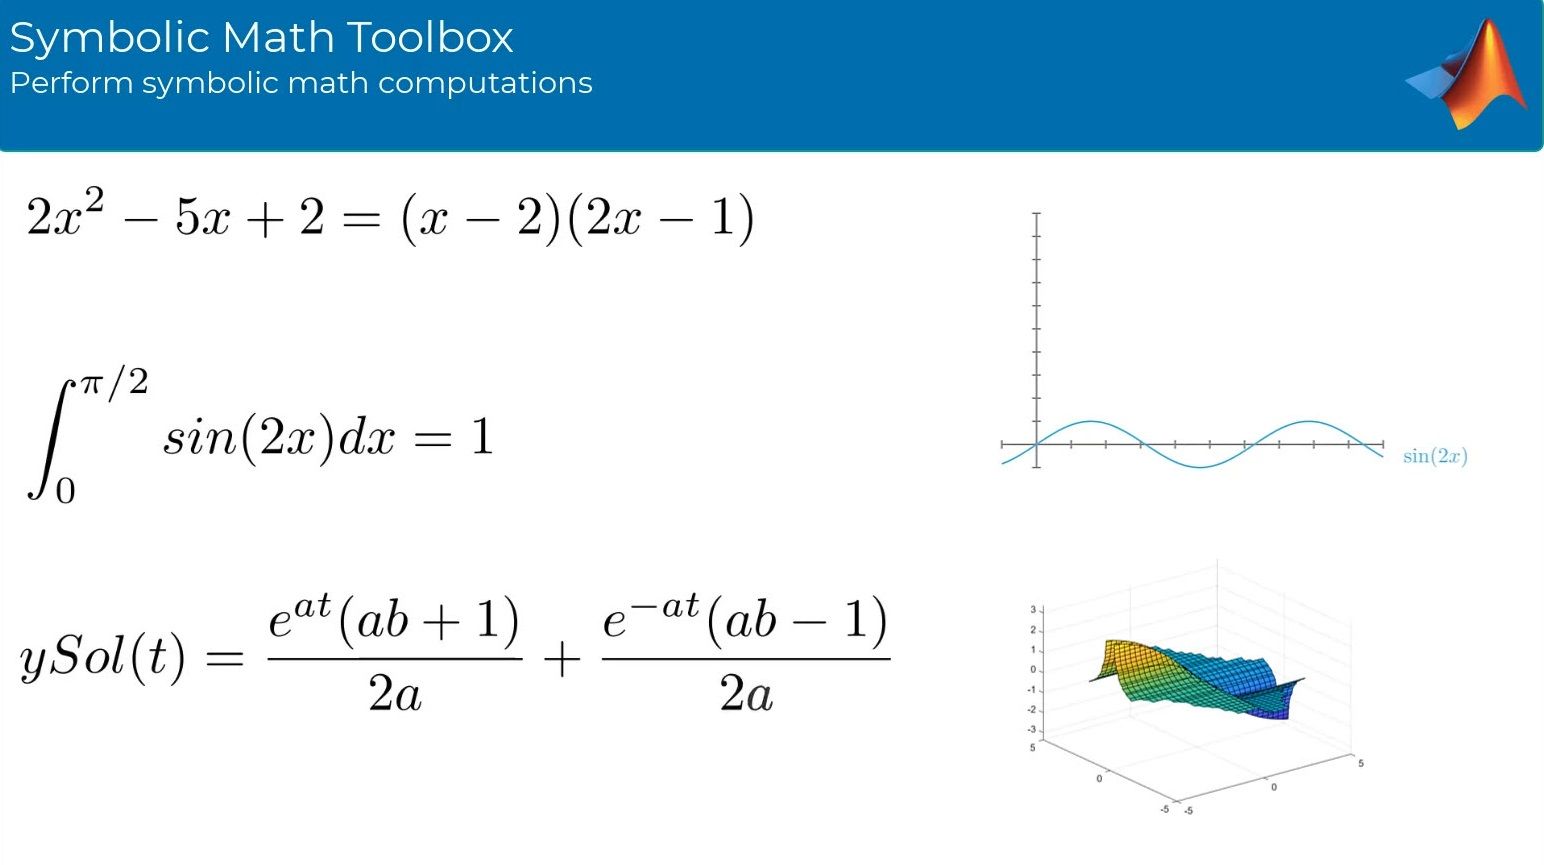 Symbolic Math Toolbox provides functions in common mathematical areas for solving, plotting, and manipulating symbolic math equations. Generate MATLAB functions, Simulink function blocks, and Simscape equations directly from symbolic expressions.